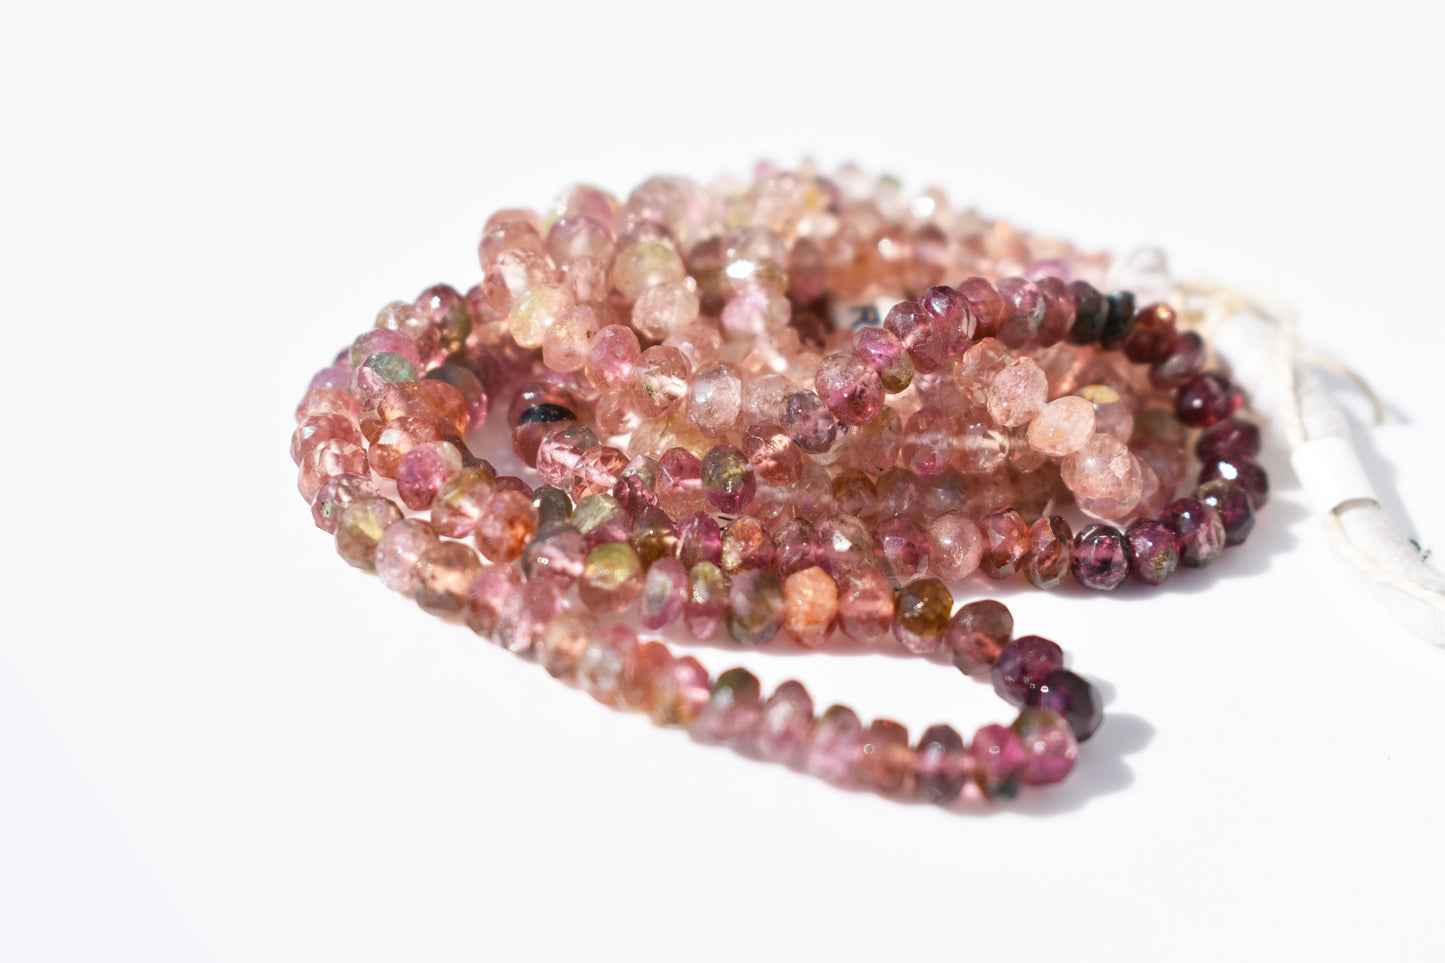 Ombre Tourmaline Pink Rondelle Beads 3.5-4mm x 2-2.5mm - Orange & Grey-Blue Inclusions